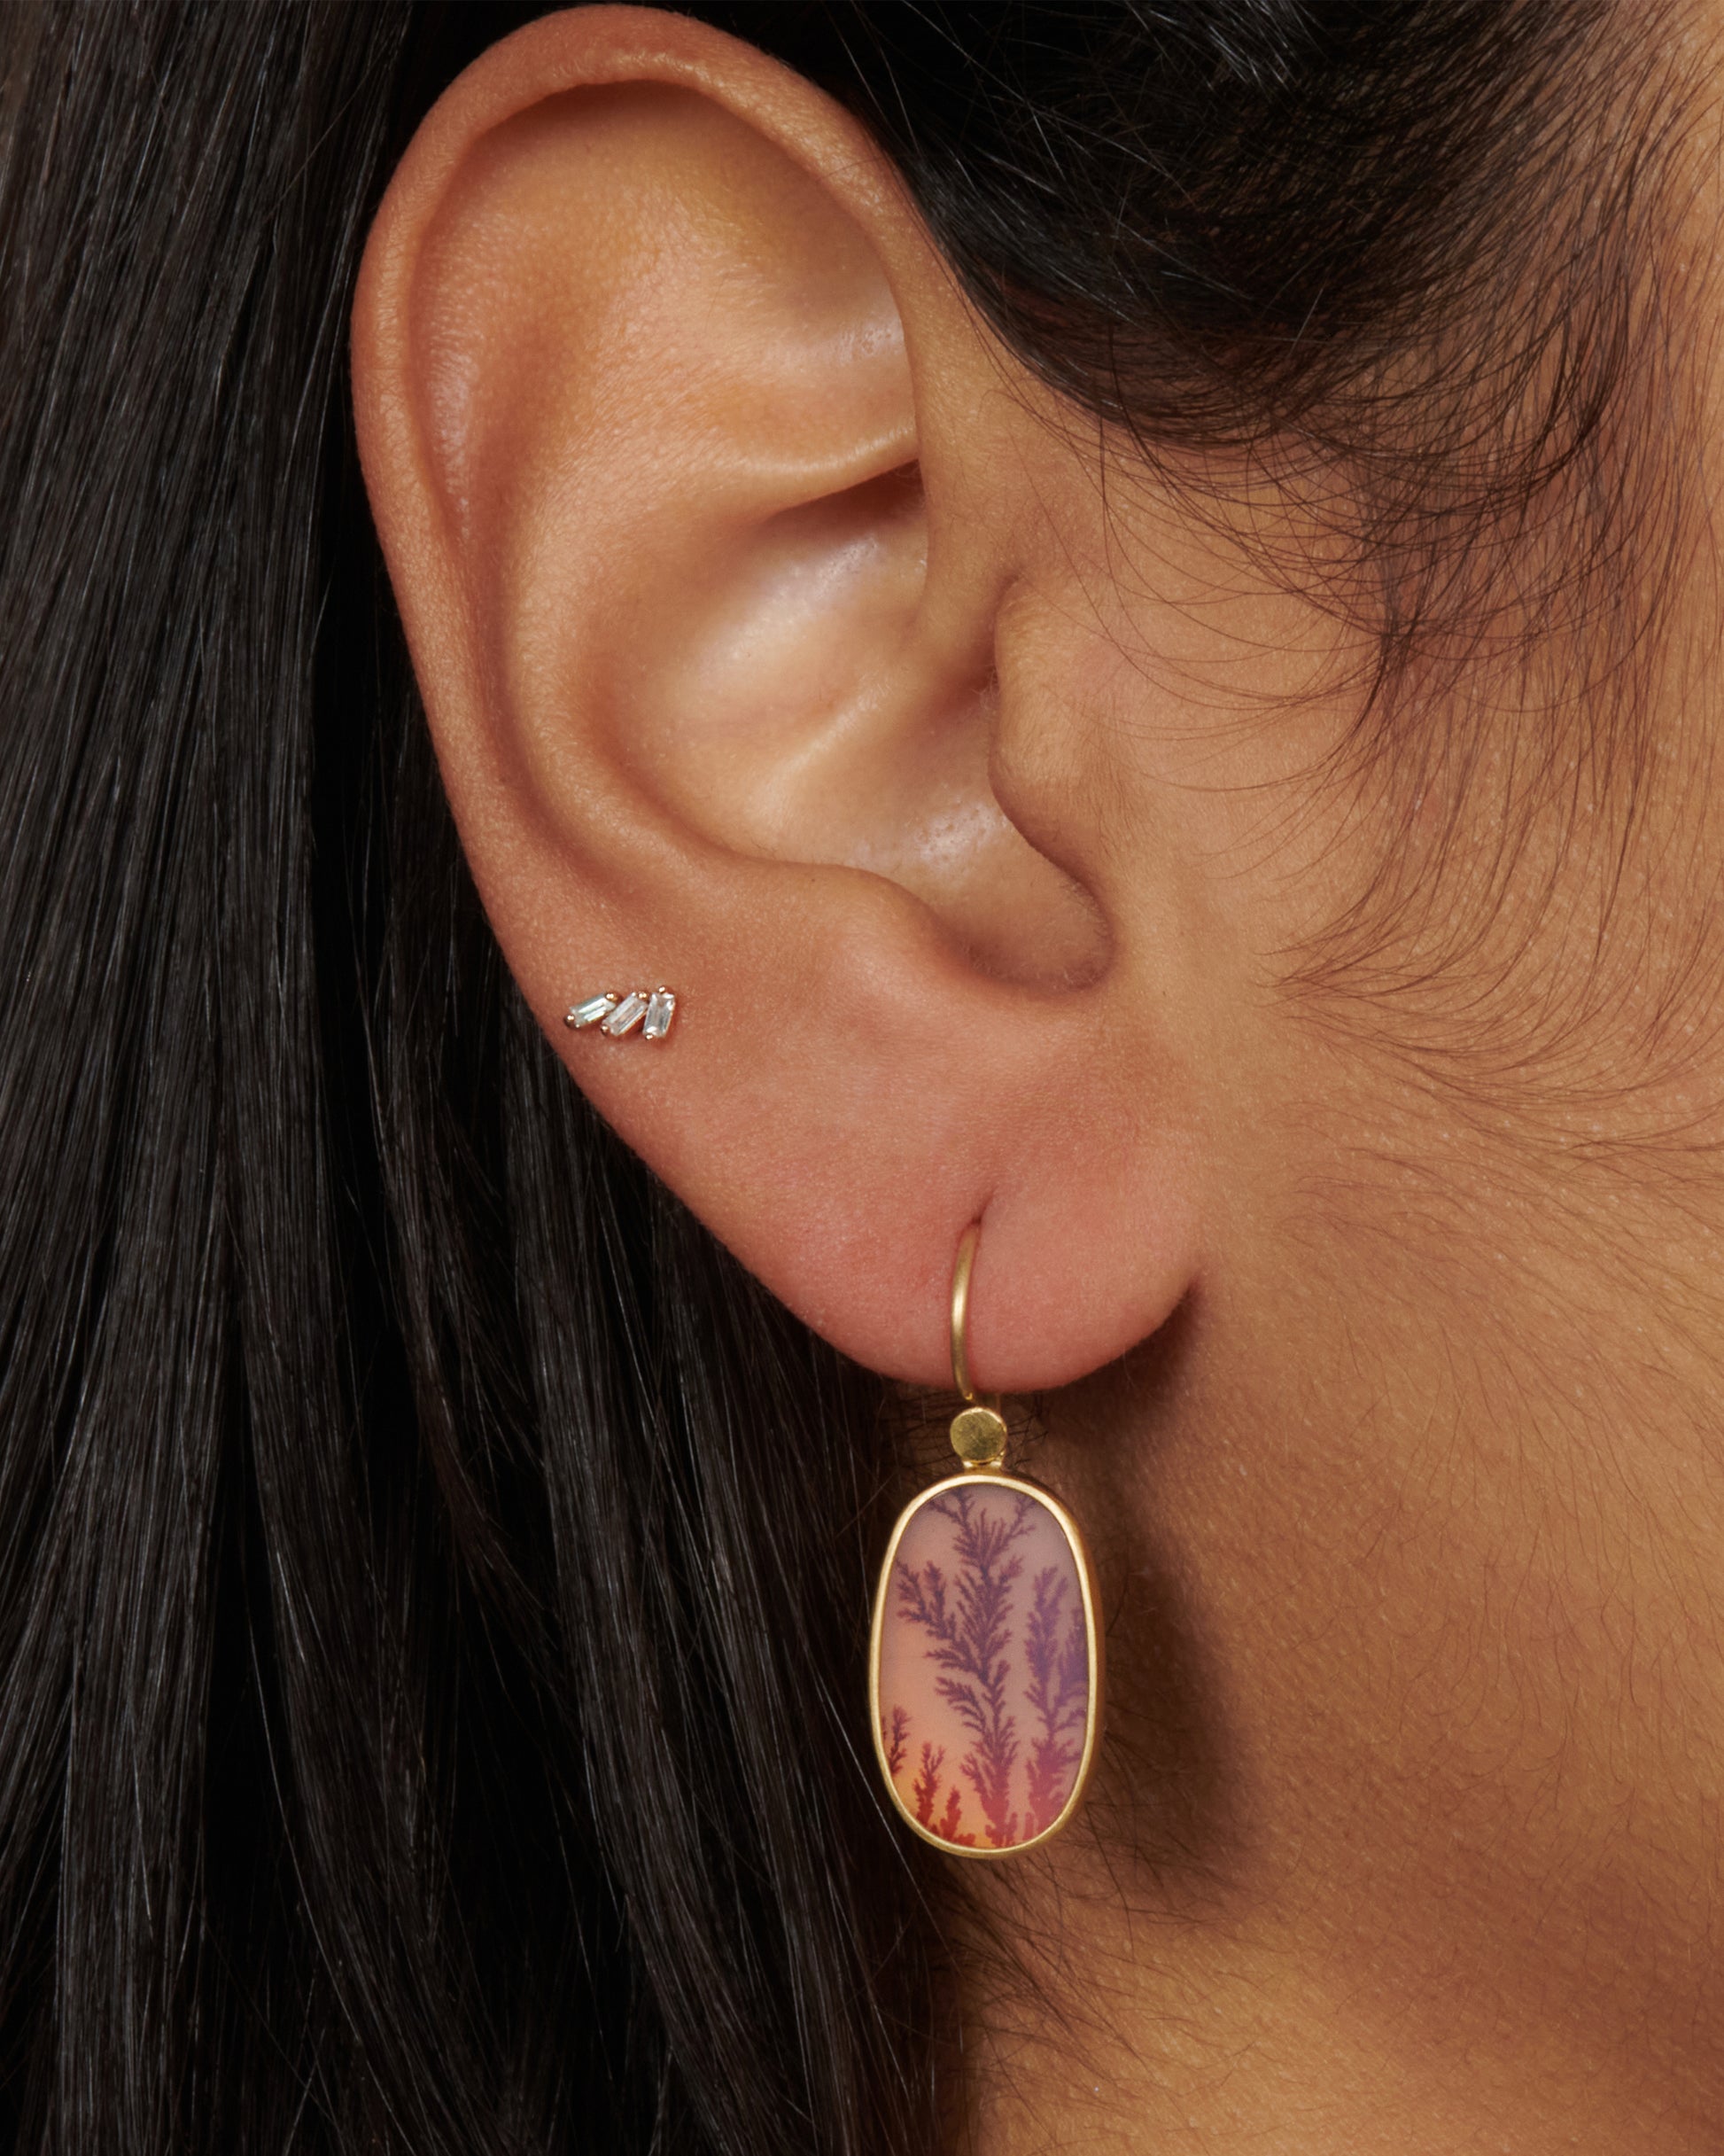 A pair of 18k gold drops with oval fiery dendritic agate stones. The tree-like occlusions swim in rosy pink light, adding a warm, glowing effect.